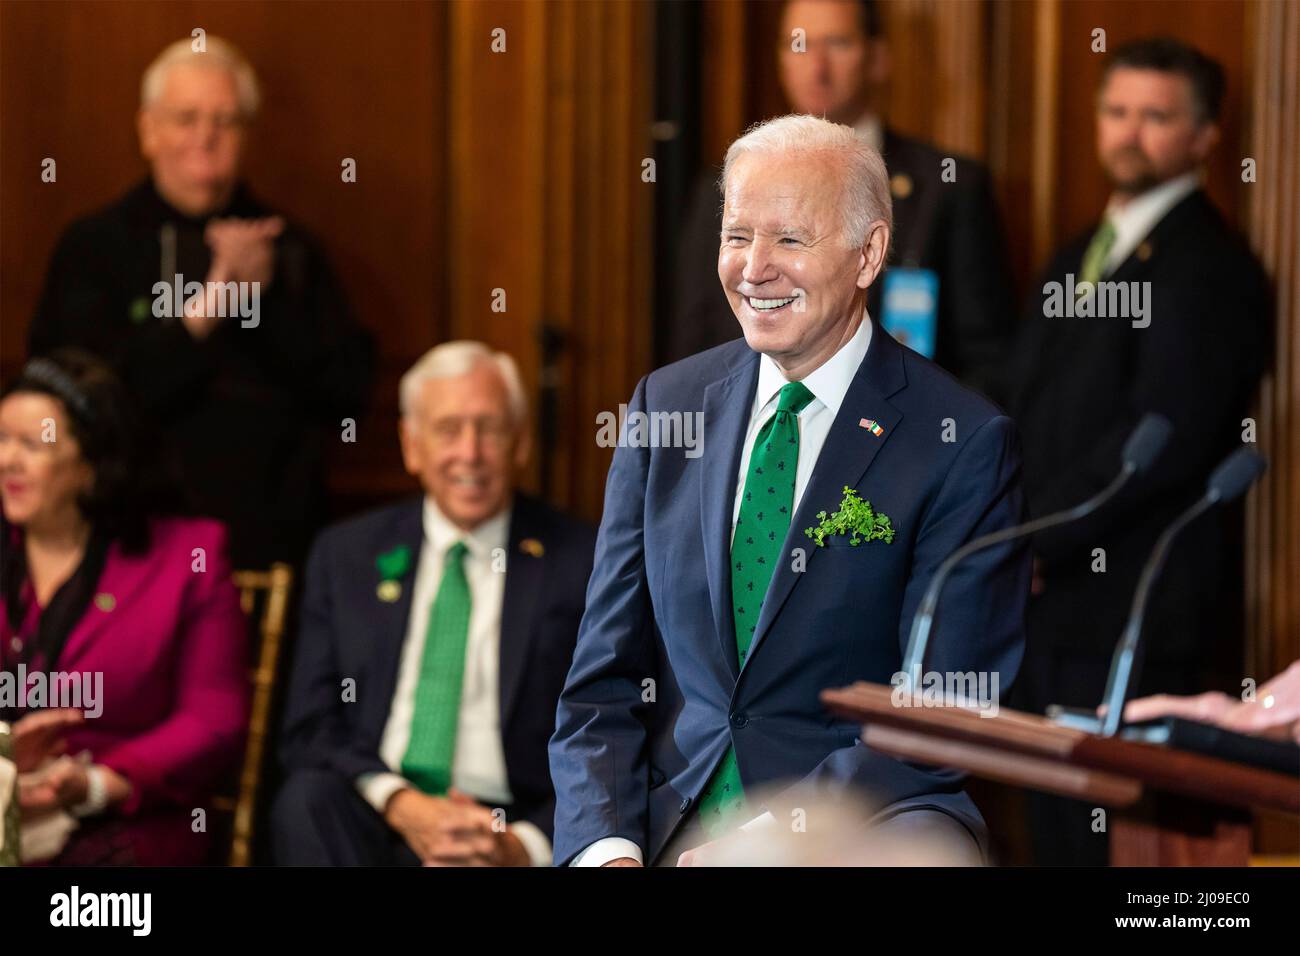 Washington DC, USA. 17th Mar, 2022. Washington DC, USA. 17 March, 2022. U.S President Joe Biden smiles as he hold the annual annual Friends of Ireland luncheon celebrating St Patricks Day on Capitol Hill, March 17, 2022 in Washington, DC Irish Prime Minister Micheal Martin was unable to attend the annual event in his honor after testing positive for COVID-19. Credit: Adam Schultz/White House Photo/Alamy Live News Stock Photo